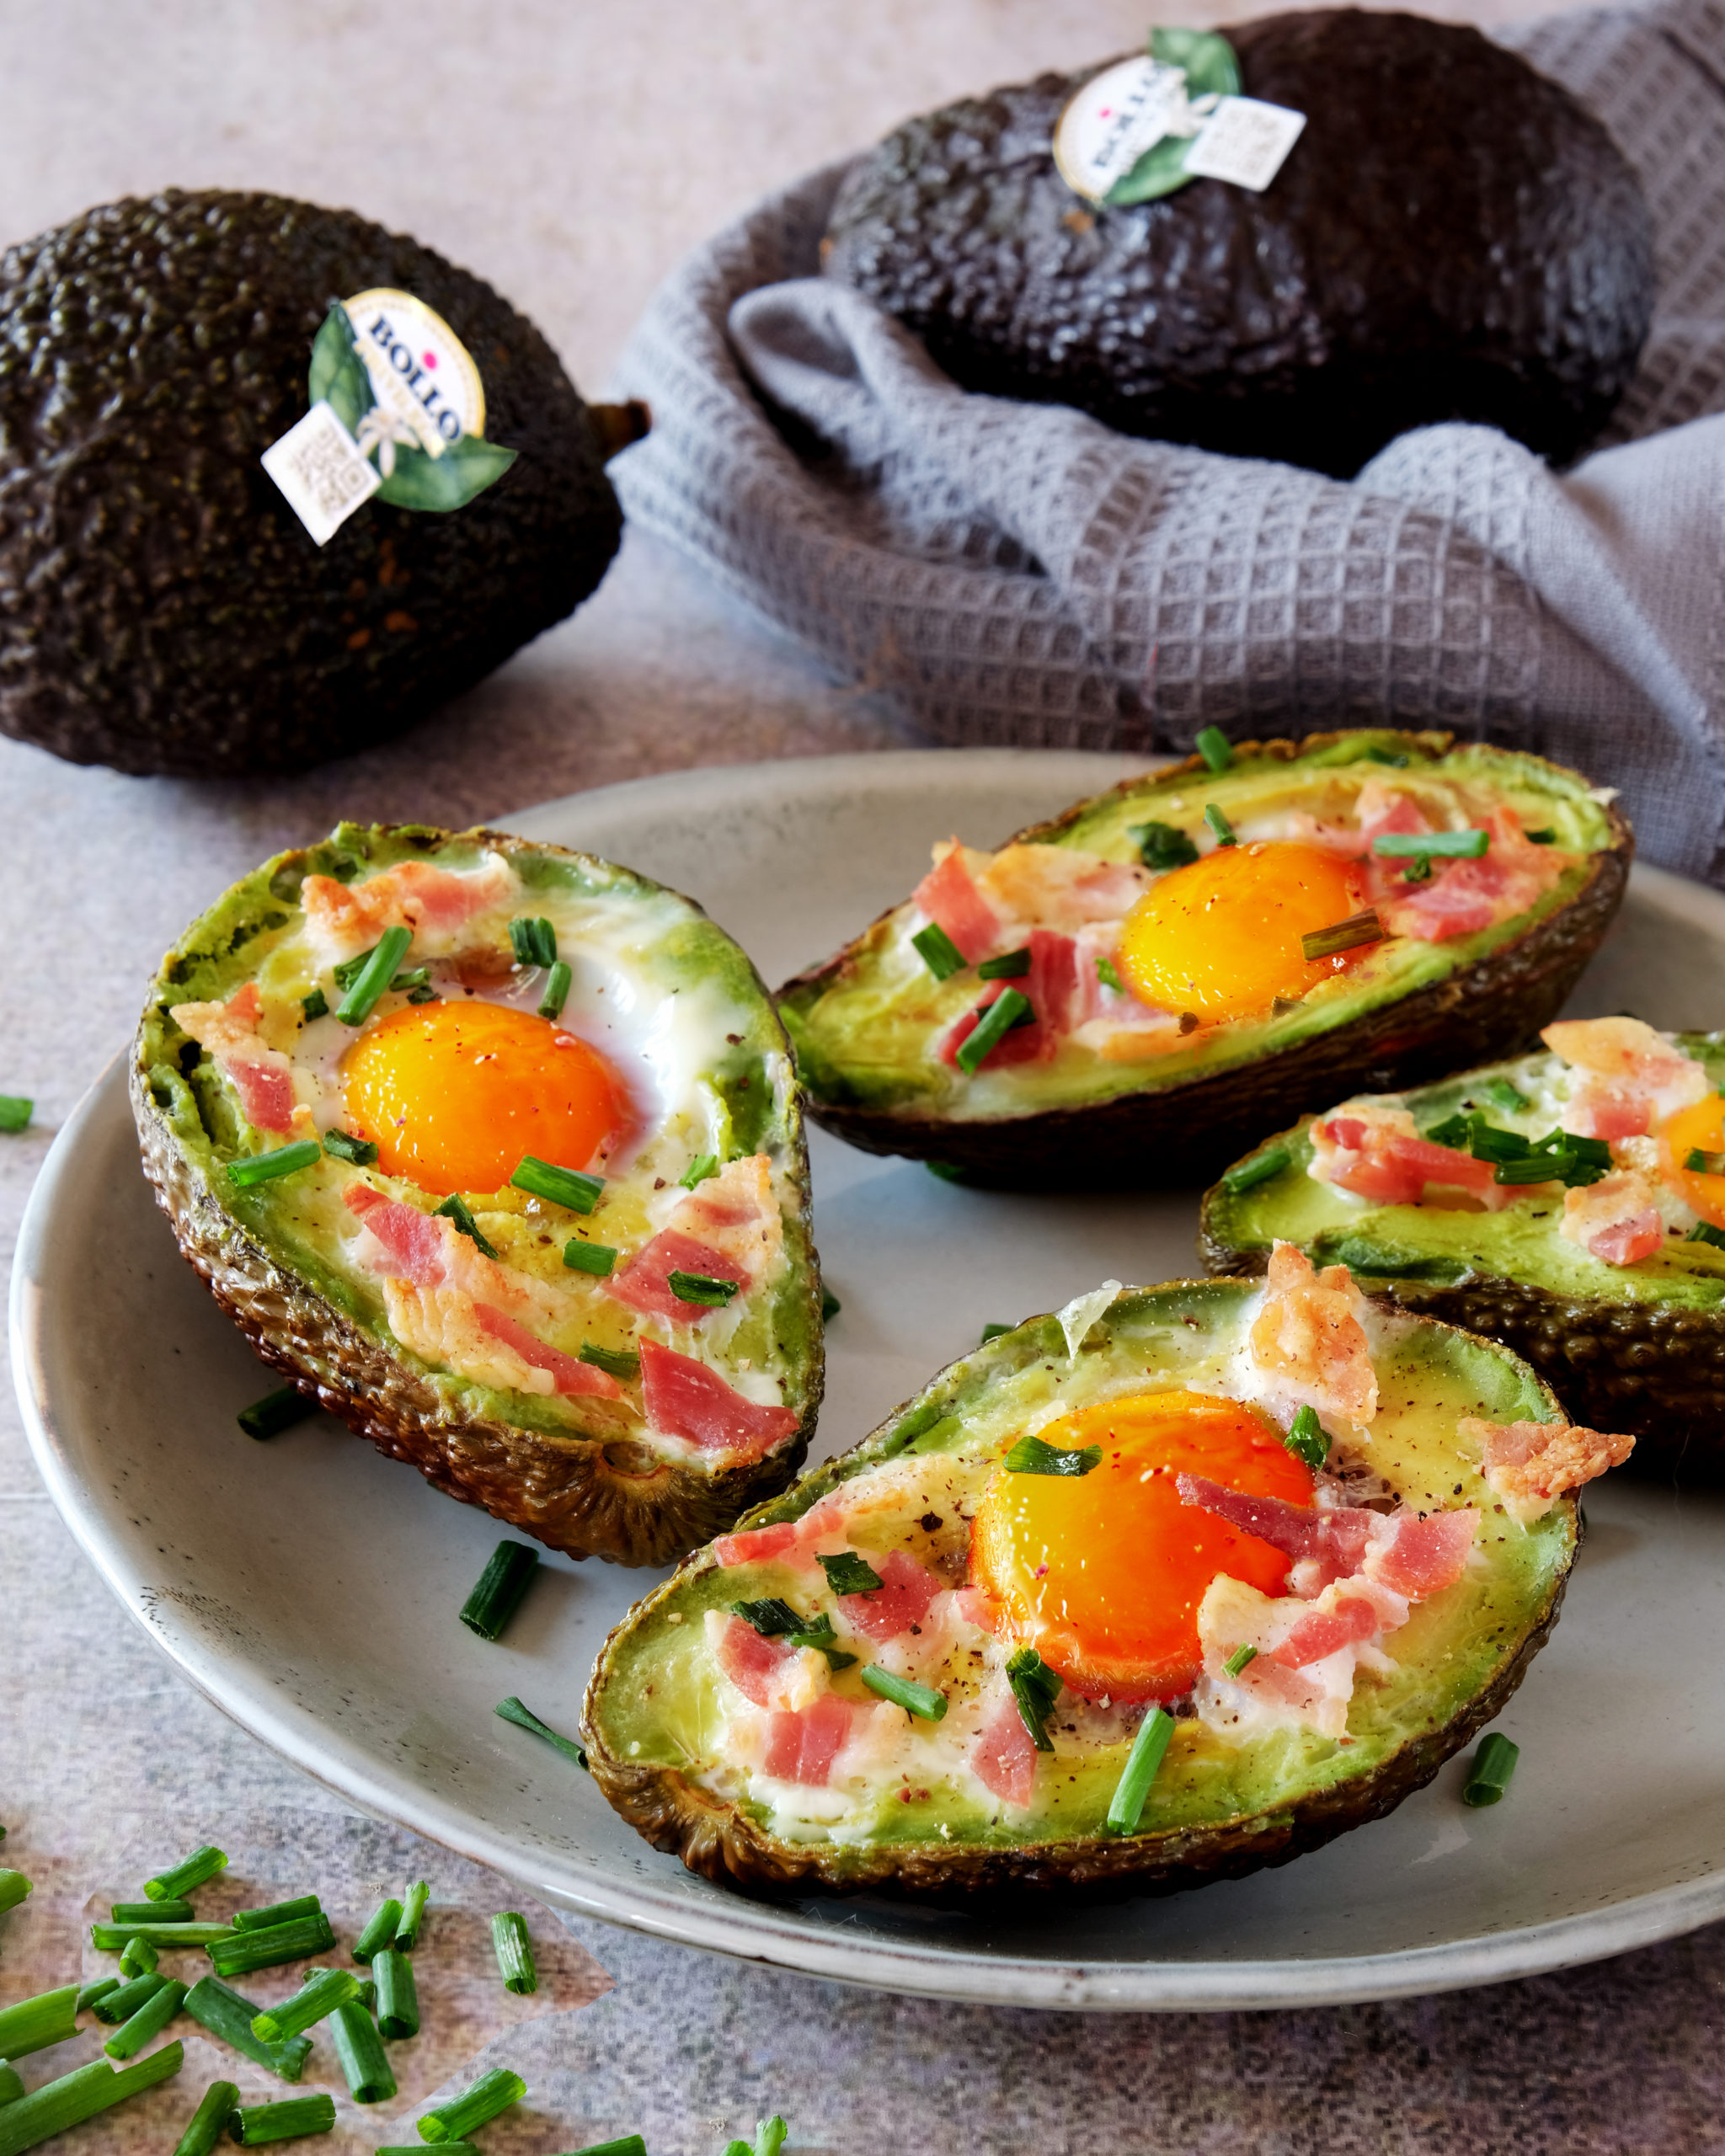 Baked avocados with eggs and bacon